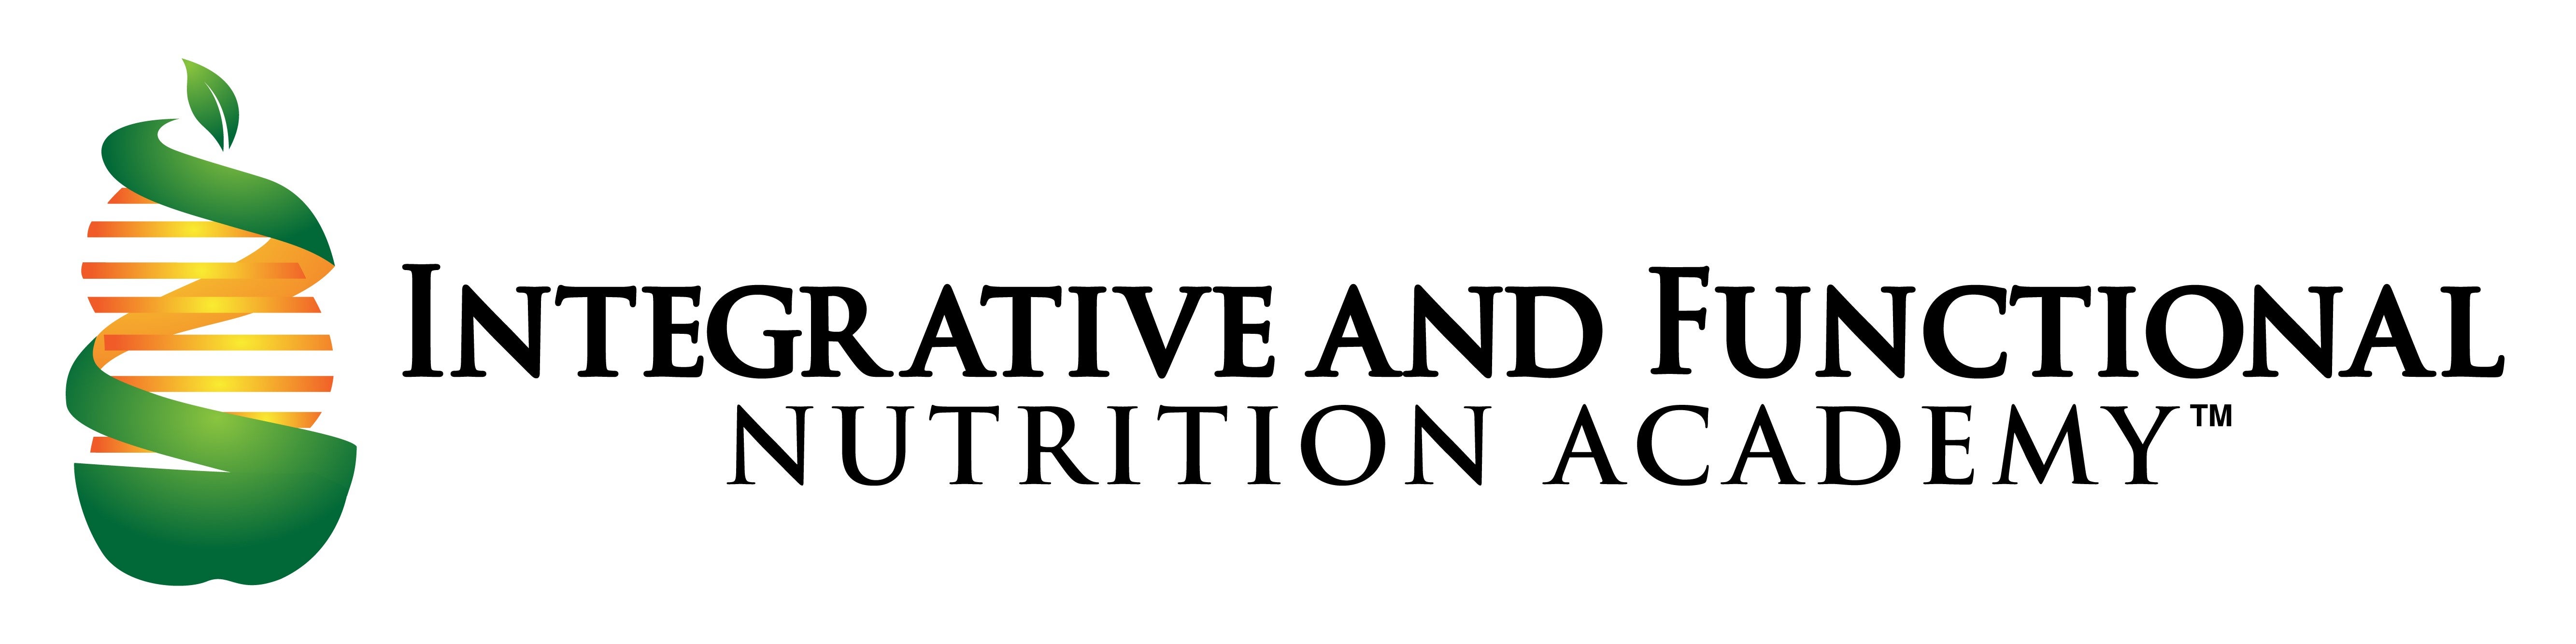 The Integrative and Functional Nutrition Academy Announces ...